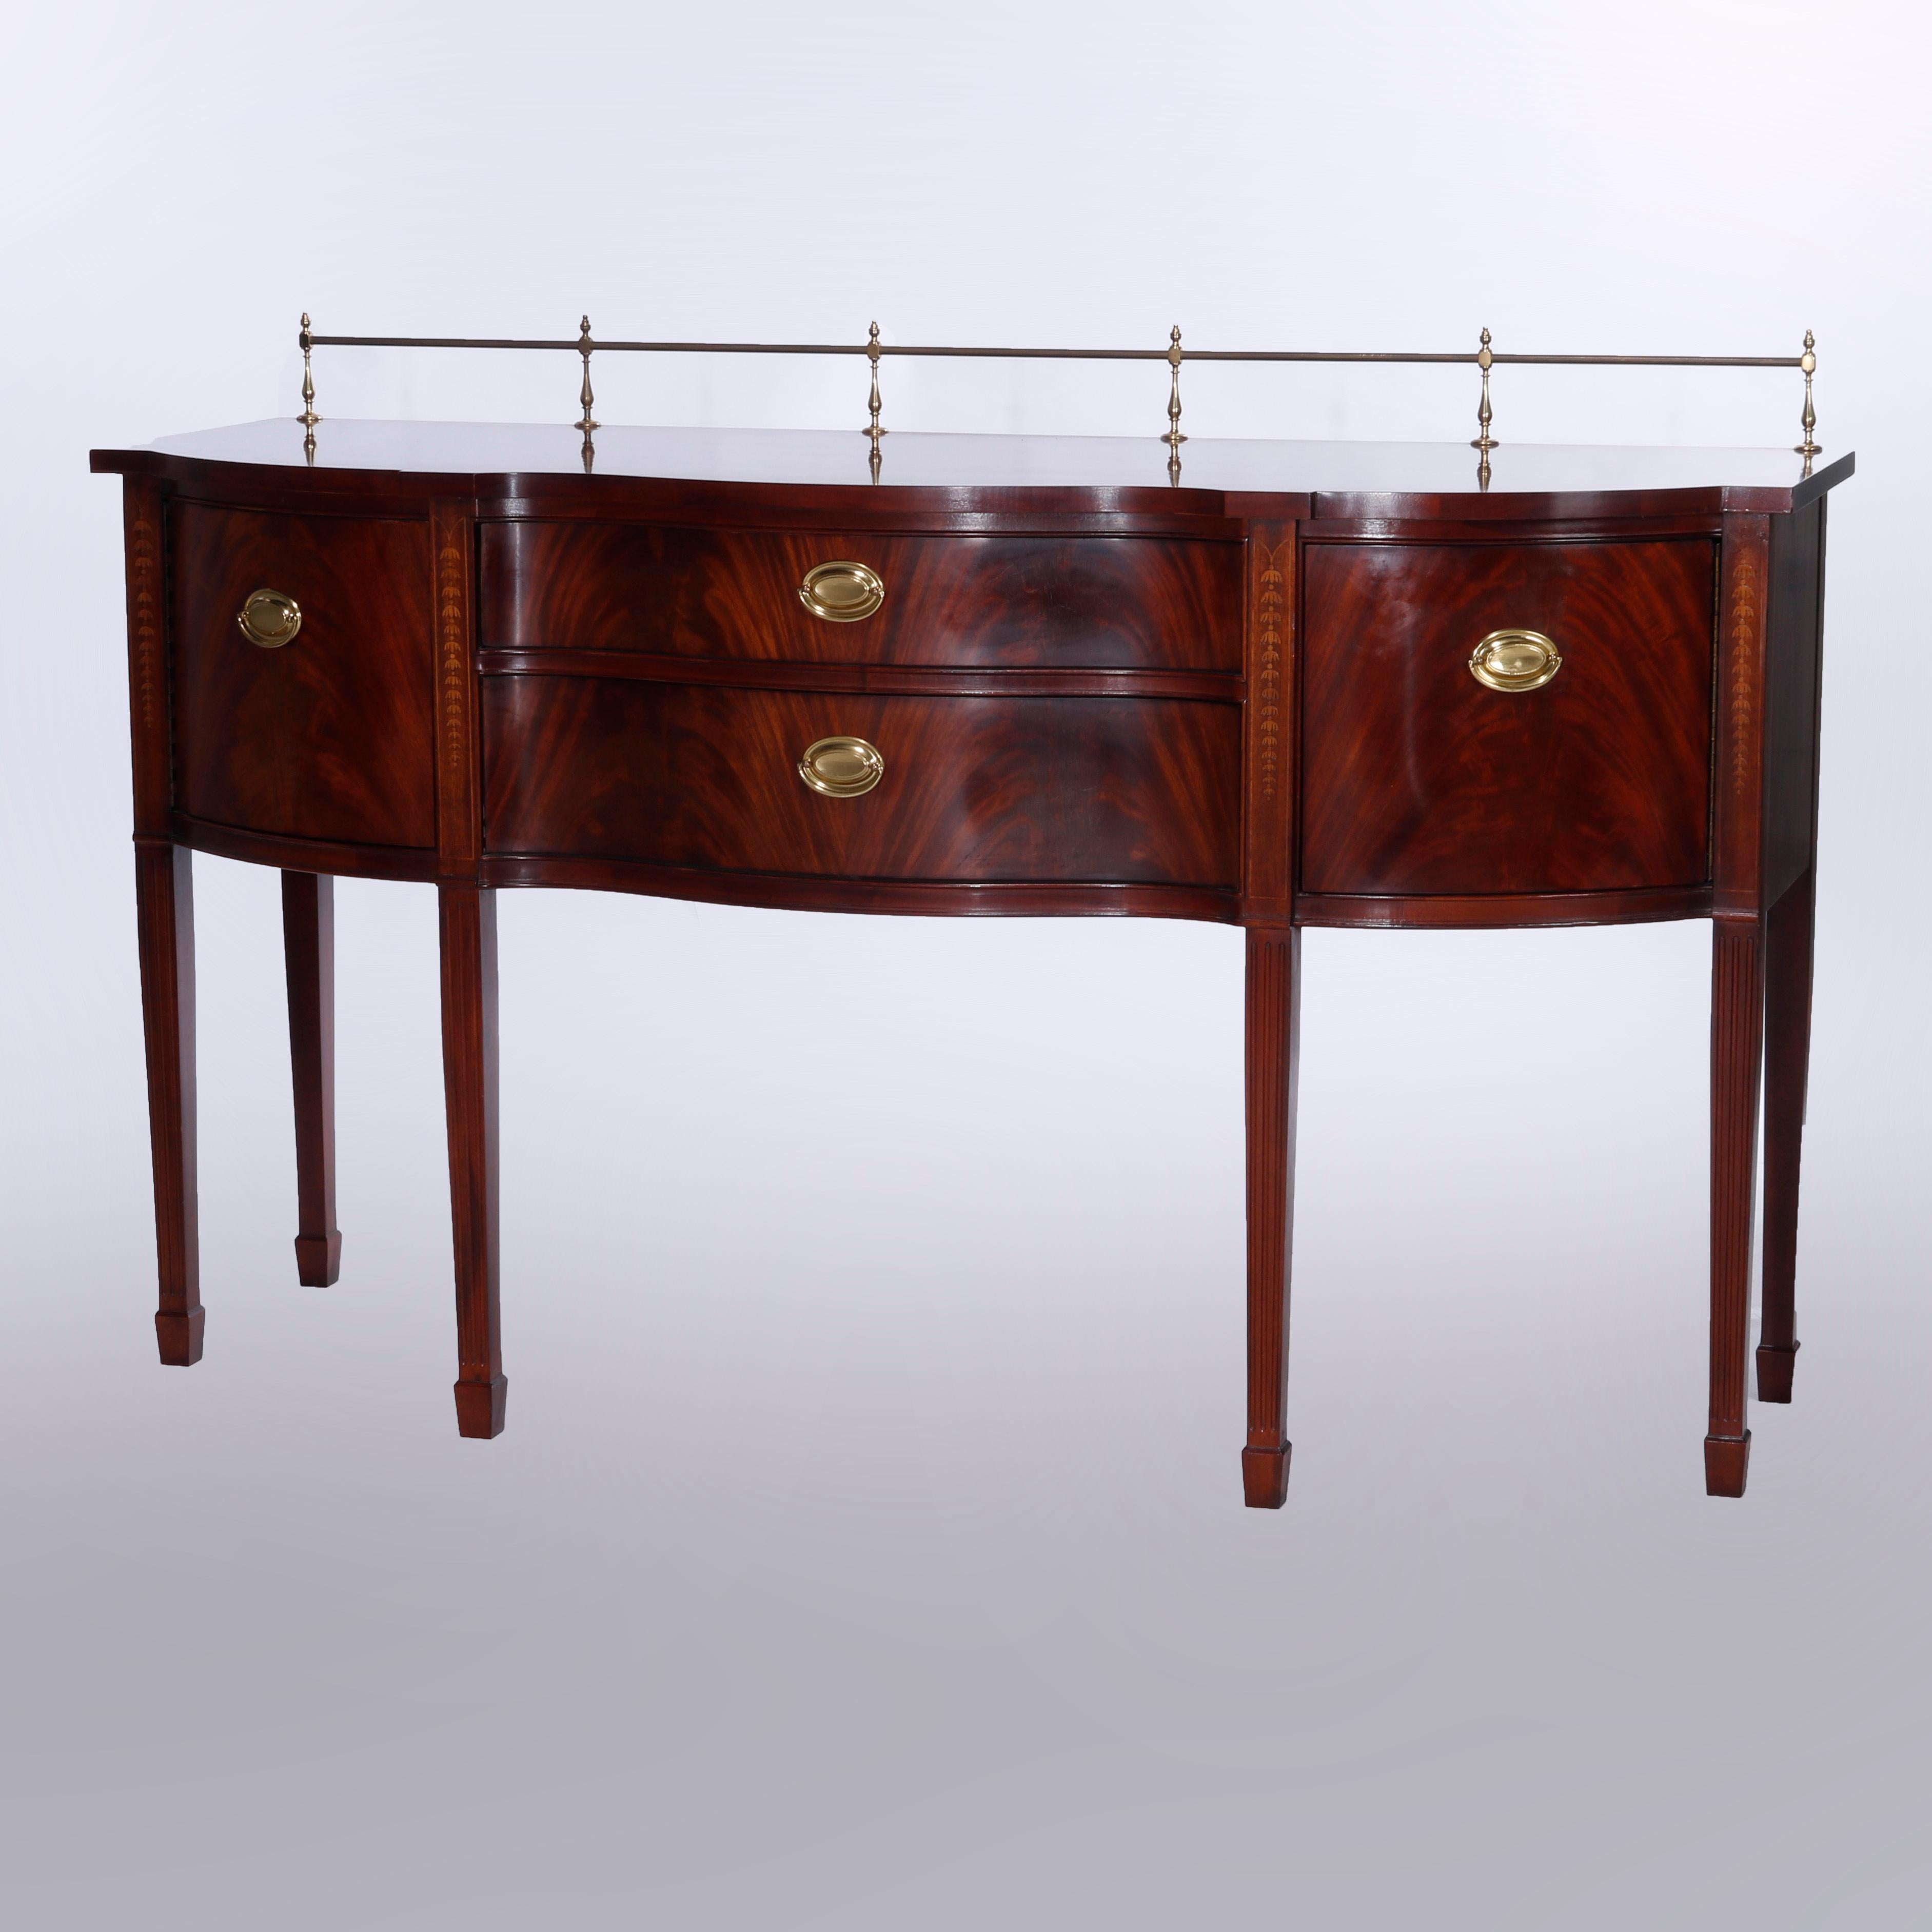 A Hepplewhite style sideboard by Thomasville offers flame mahogany construction in serpentine form with top having brass rail over case with central double drawer stack and flanking blind cabinets, raised on tapered legs terminating in spade feet,